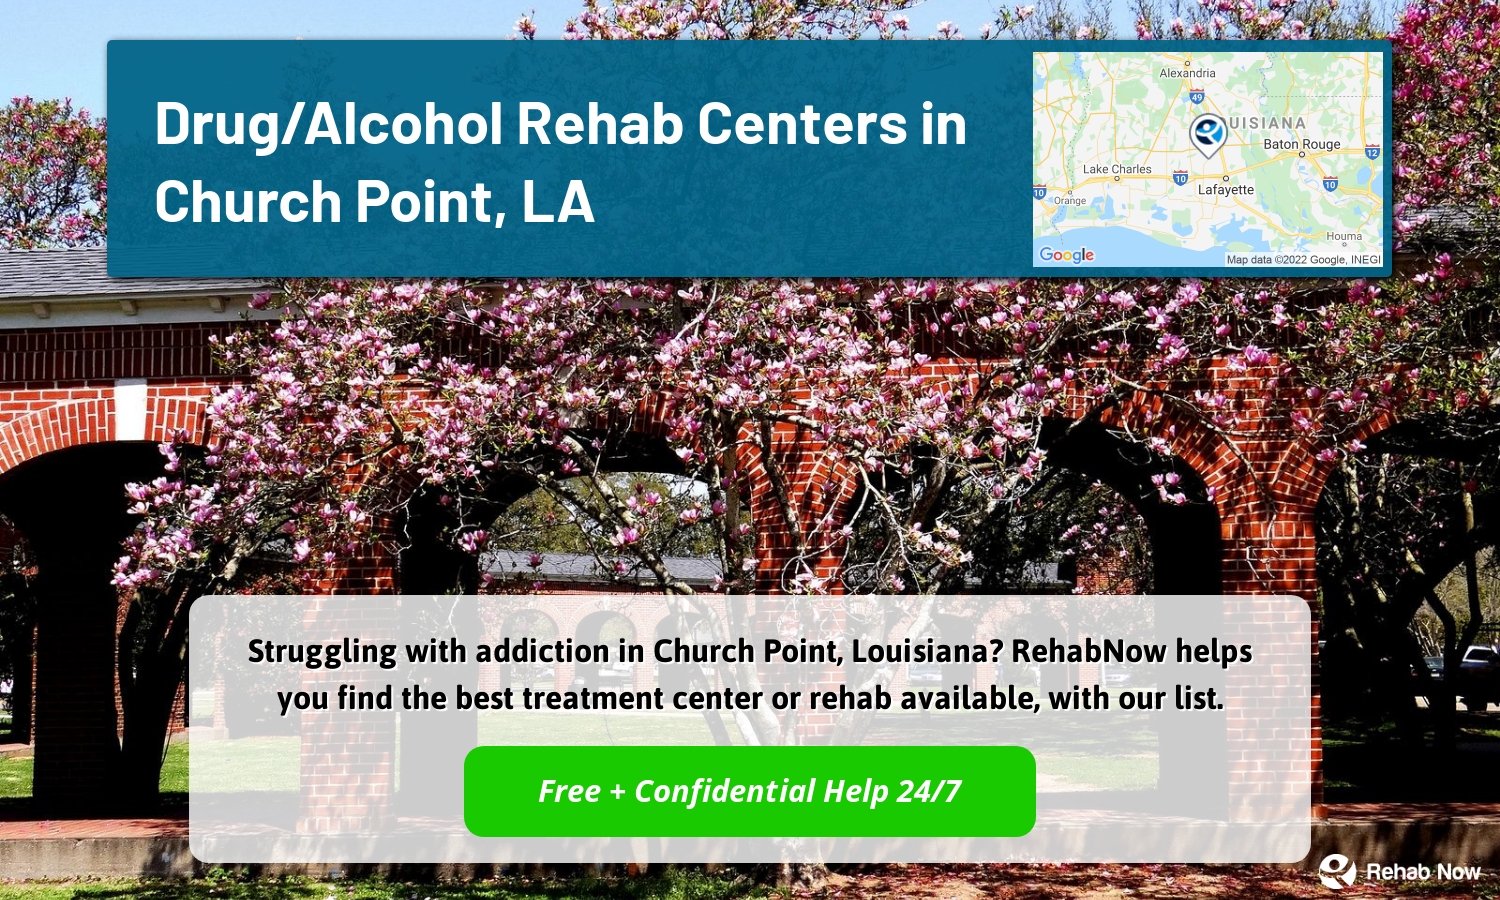 Struggling with addiction in Church Point, Louisiana? RehabNow helps you find the best treatment center or rehab available, with our list.